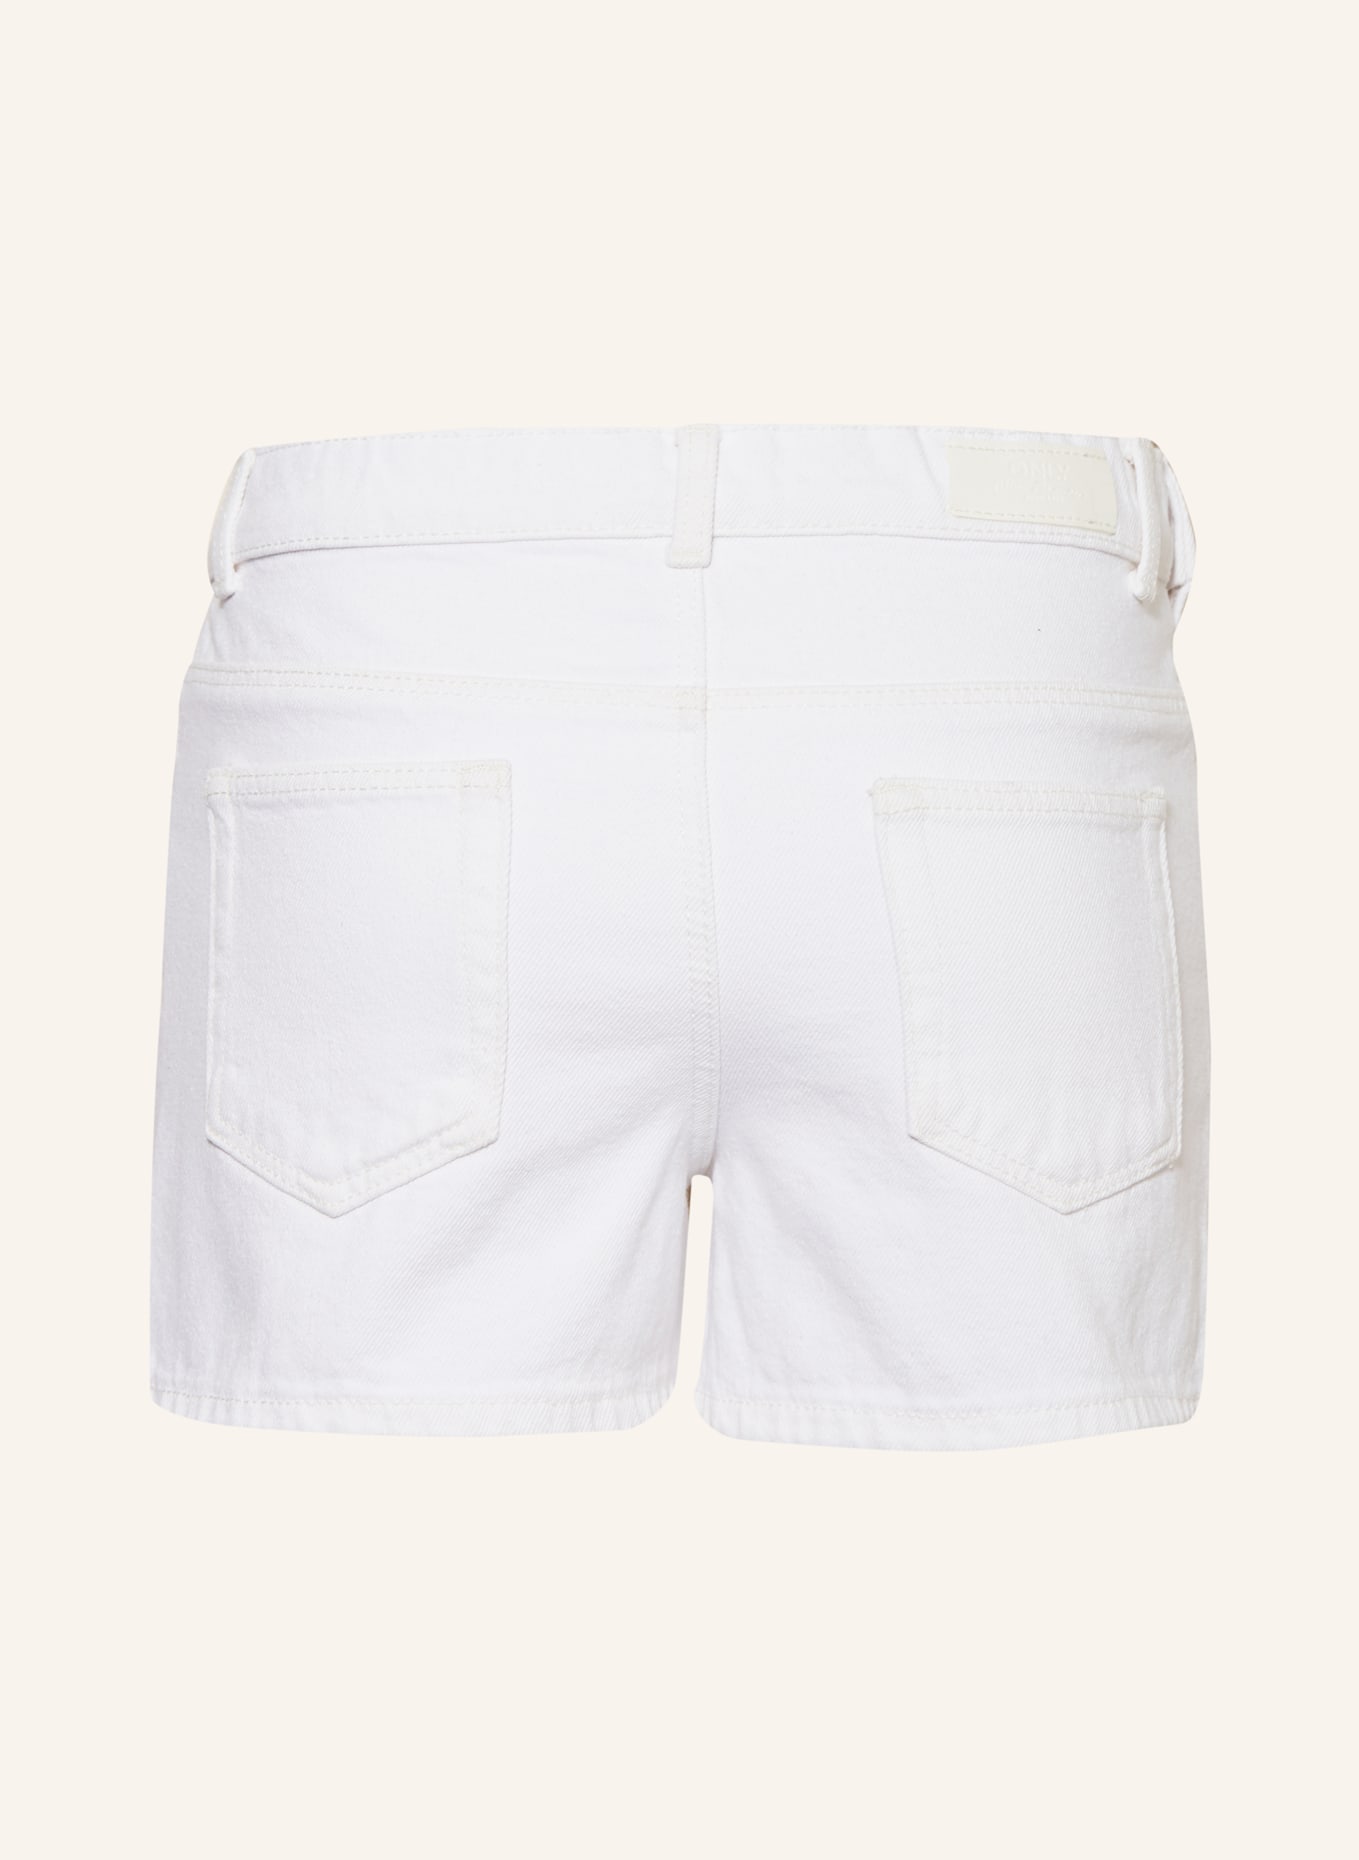 ONLY Jeansshorts, Farbe: WEISS (Bild 2)